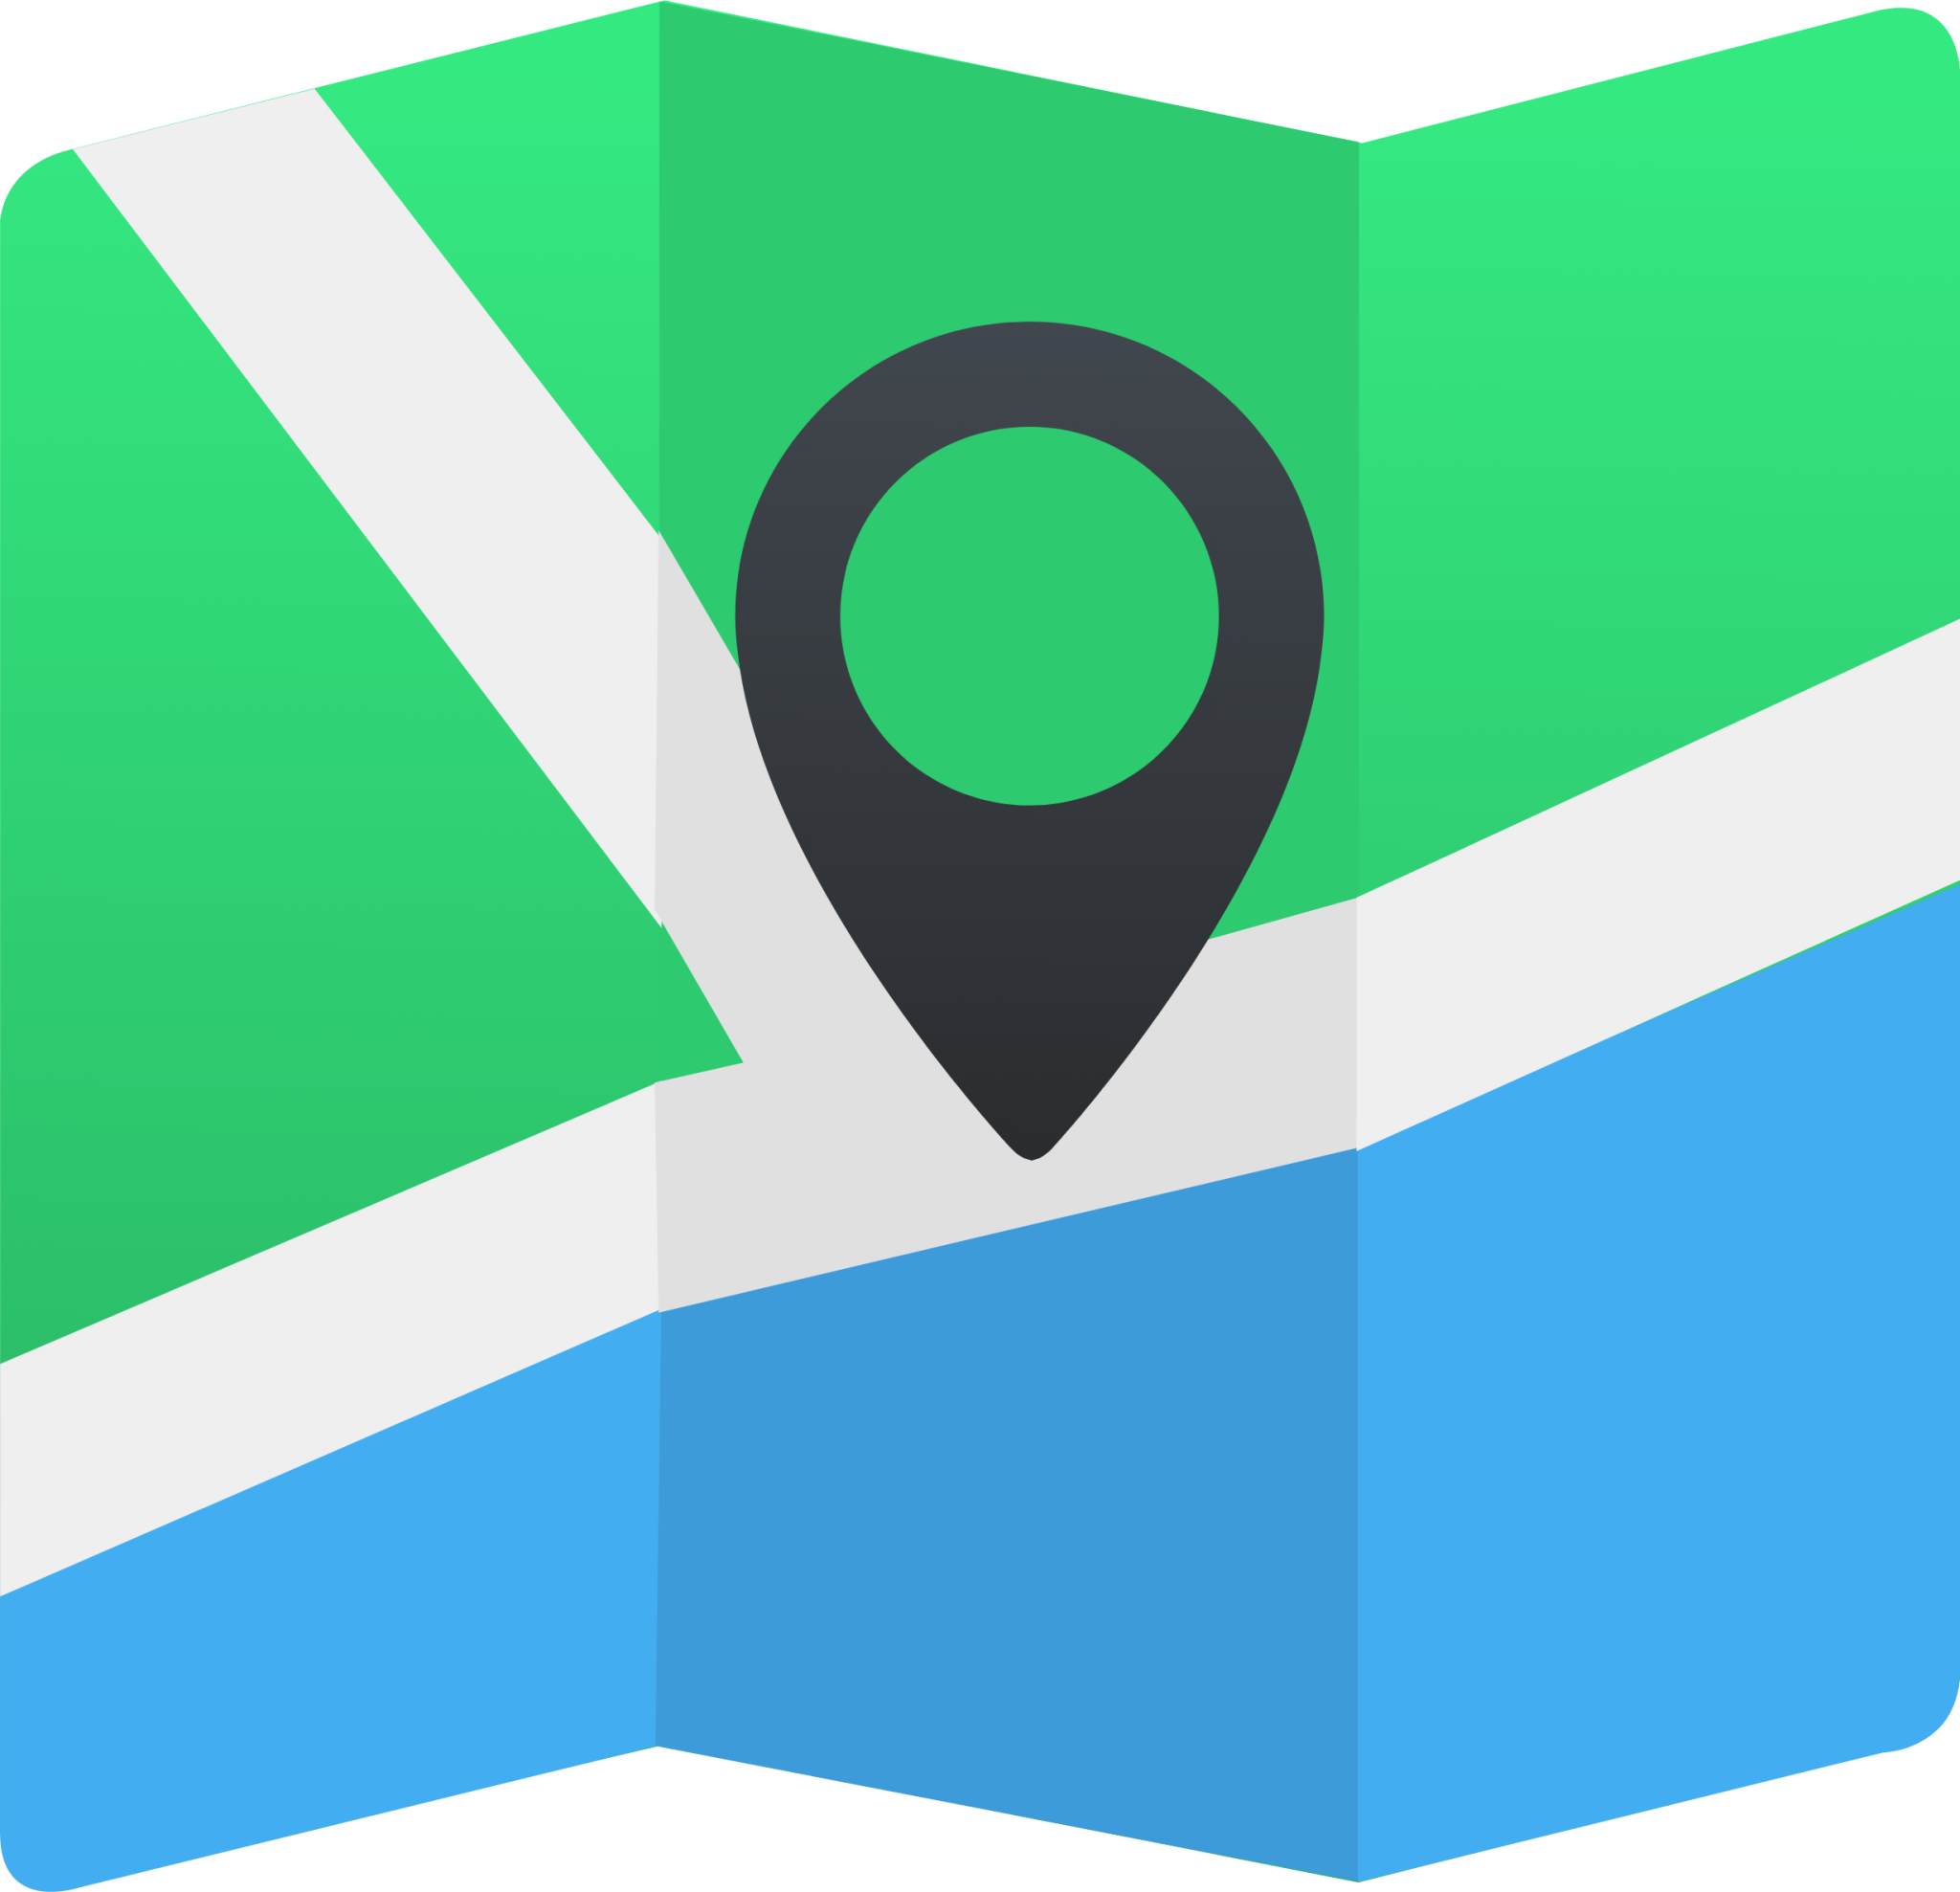 marble icon